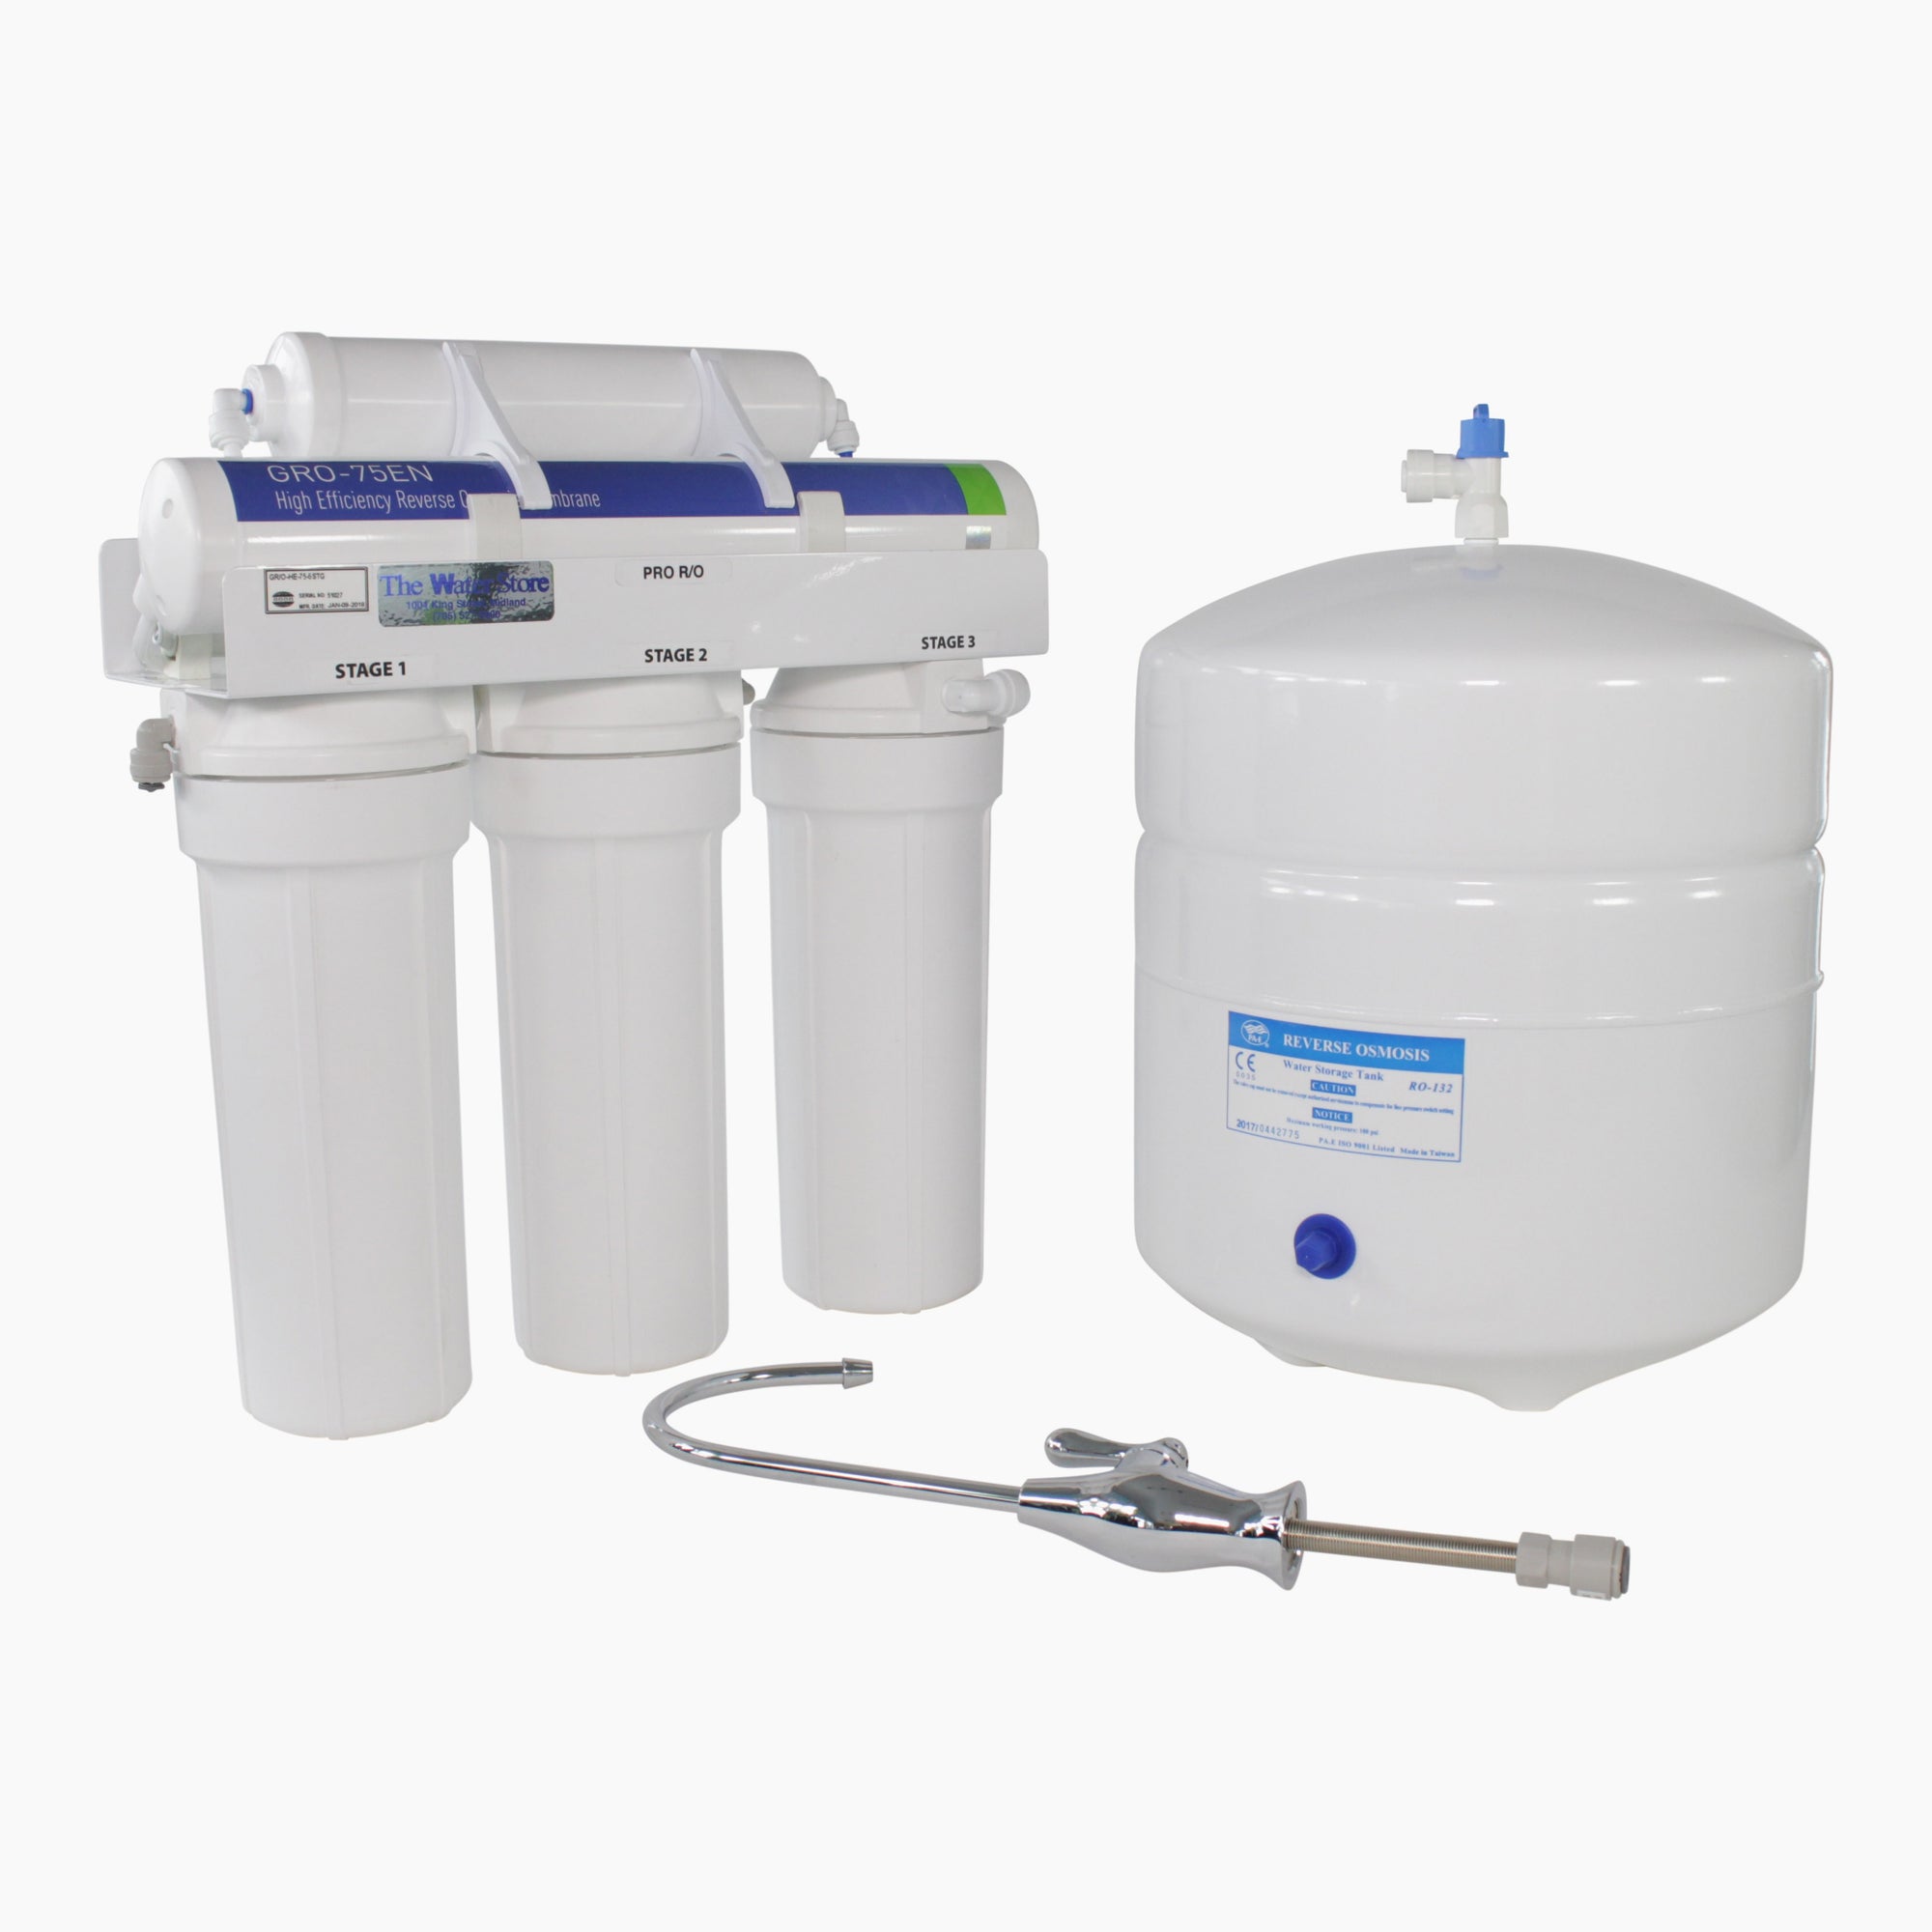 How Fast is a Water Saver 75 Reverse Osmosis System?